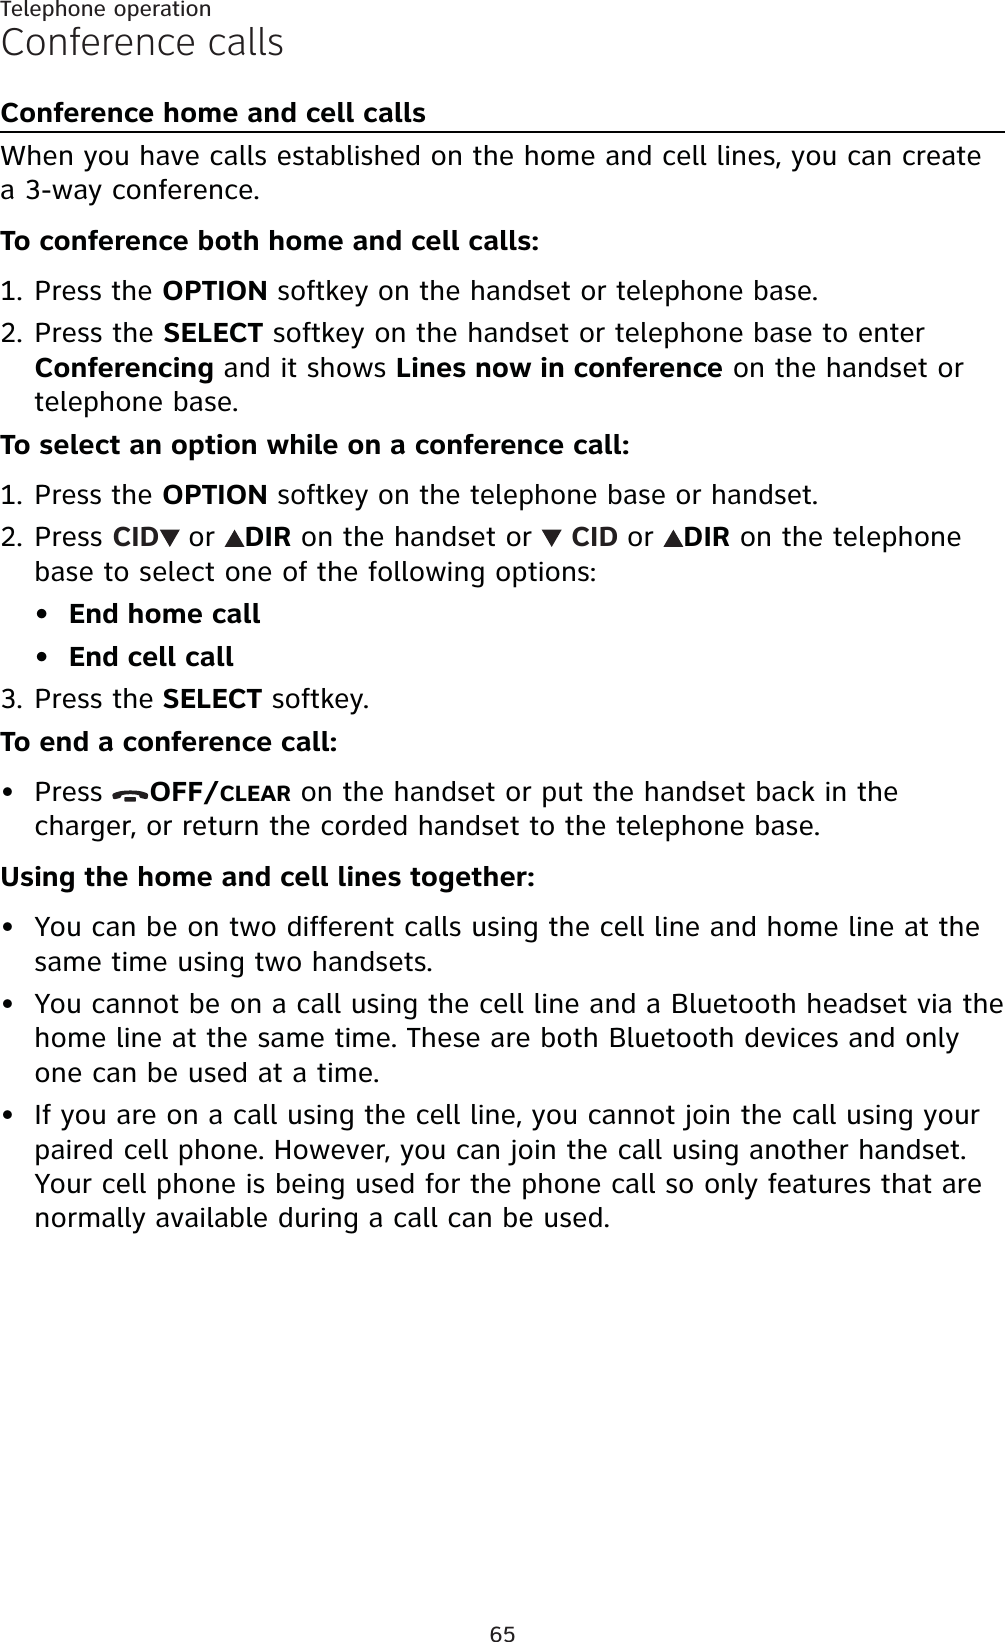 65Telephone operationConference callsConference home and cell callsWhen you have calls established on the home and cell lines, you can create a 3-way conference.To conference both home and cell calls:Press the OPTION softkey on the handset or telephone base.Press the SELECT softkey on the handset or telephone base to enter Conferencing and it shows Lines now in conference on the handset or telephone base. To select an option while on a conference call:Press the OPTION softkey on the telephone base or handset.Press CID or DIR on the handset or  CID or DIR on the telephone base to select one of the following options:End home callEnd cell callPress the SELECT softkey.To end a conference call:Press  OFF/CLEAR on the handset or put the handset back in the charger, or return the corded handset to the telephone base.Using the home and cell lines together:You can be on two different calls using the cell line and home line at the same time using two handsets.You cannot be on a call using the cell line and a Bluetooth headset via the home line at the same time. These are both Bluetooth devices and only one can be used at a time.If you are on a call using the cell line, you cannot join the call using your paired cell phone. However, you can join the call using another handset. Your cell phone is being used for the phone call so only features that are normally available during a call can be used.1.2.1.2.••3.••••